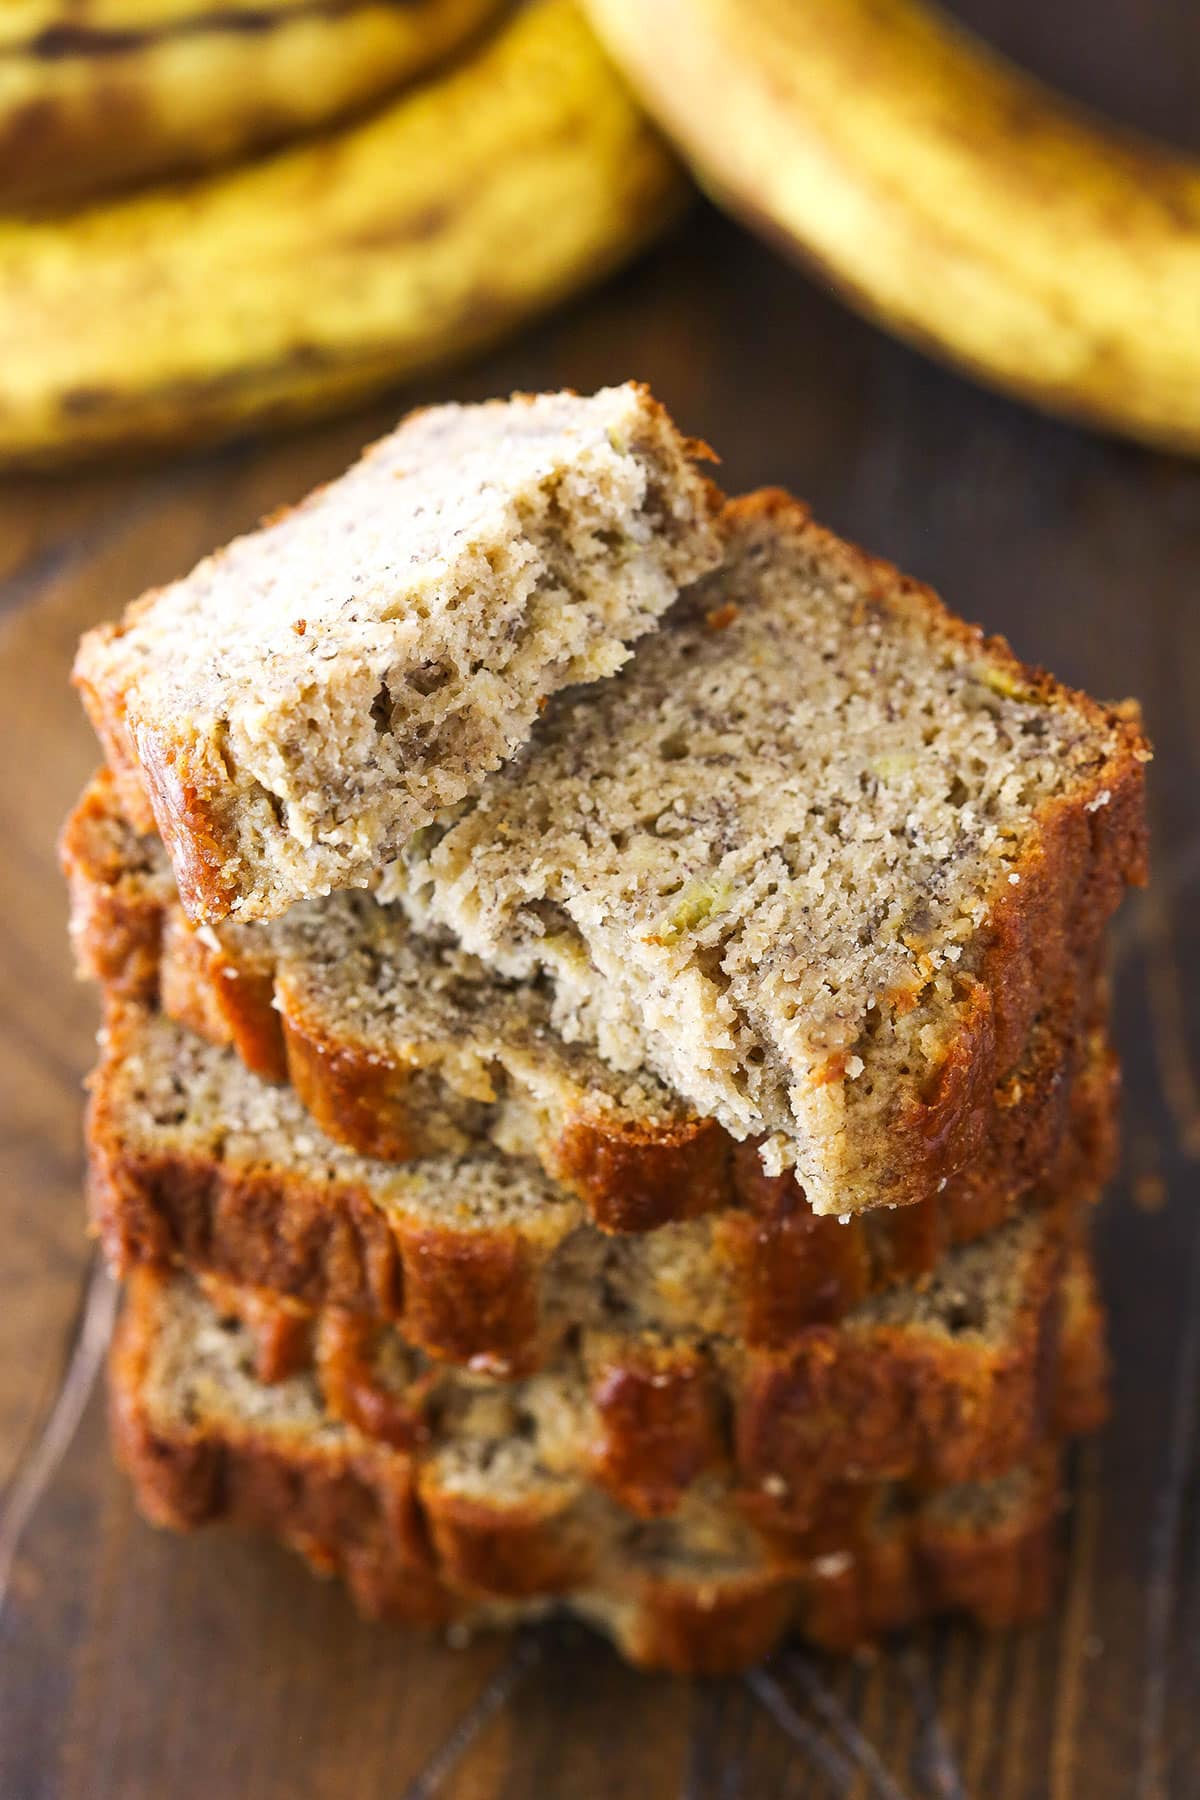 Slices of Banana Bread stacked on top of each other with the top slice broken in half